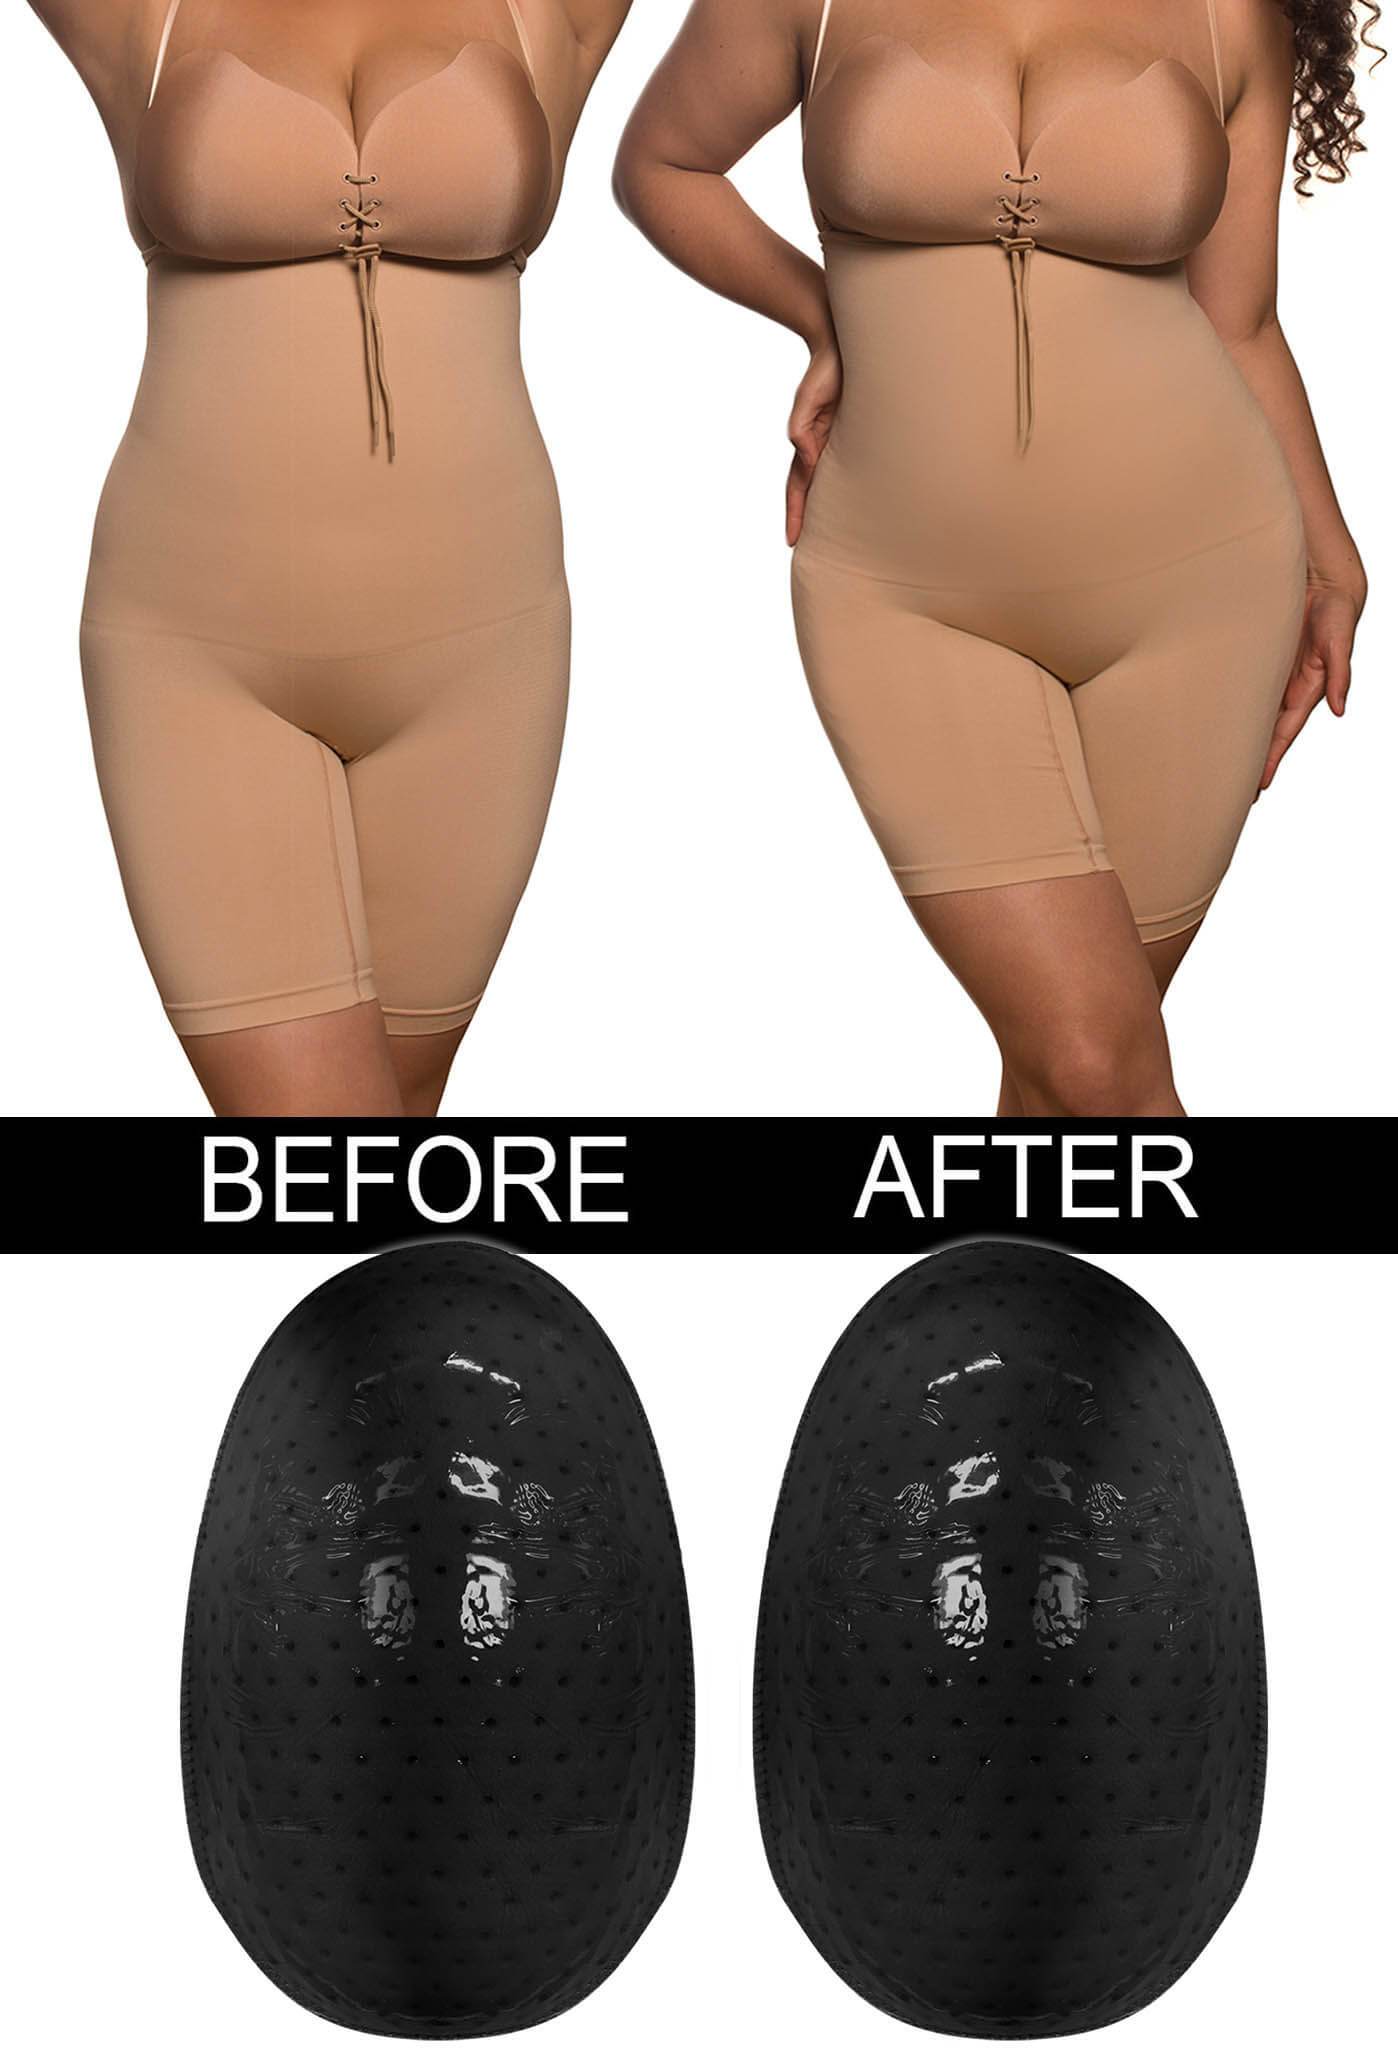 Stick On Hip/Booty Boosters, Padded Shapewear